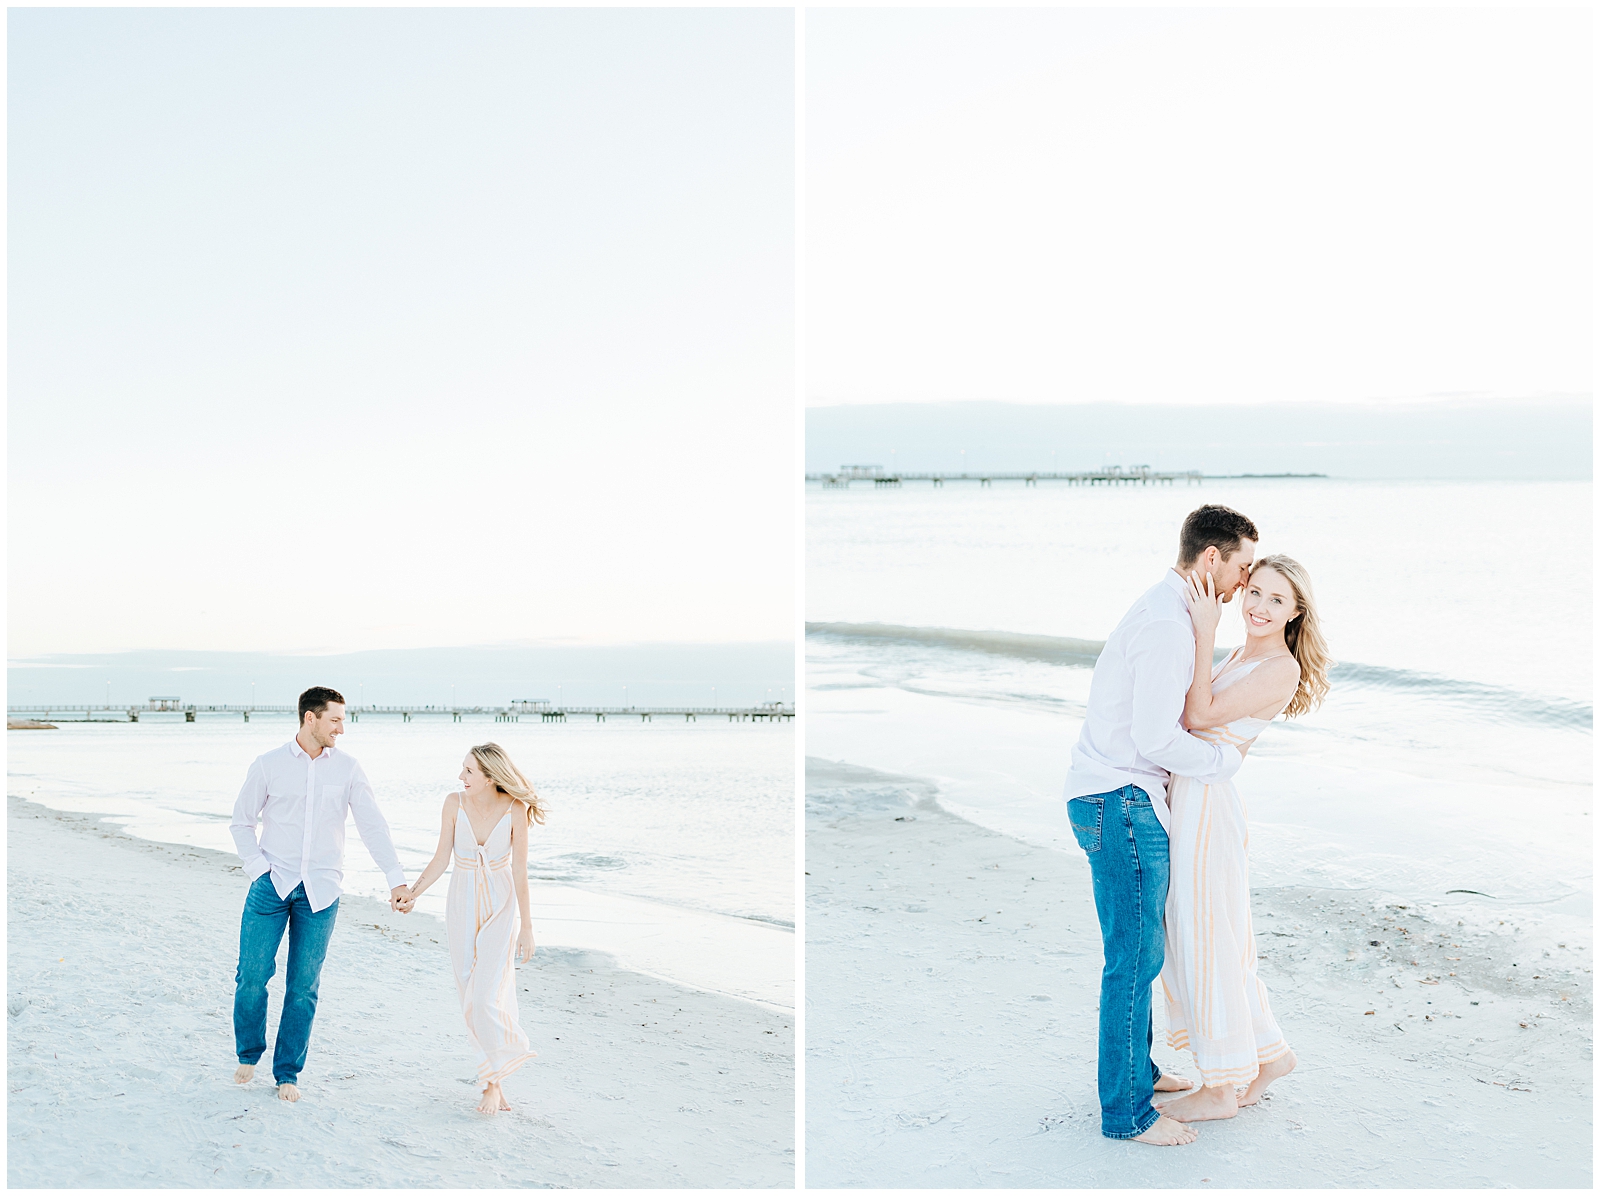 Dreamy Florida Beach Couples Session at Fort Desoto Park in Central Florida